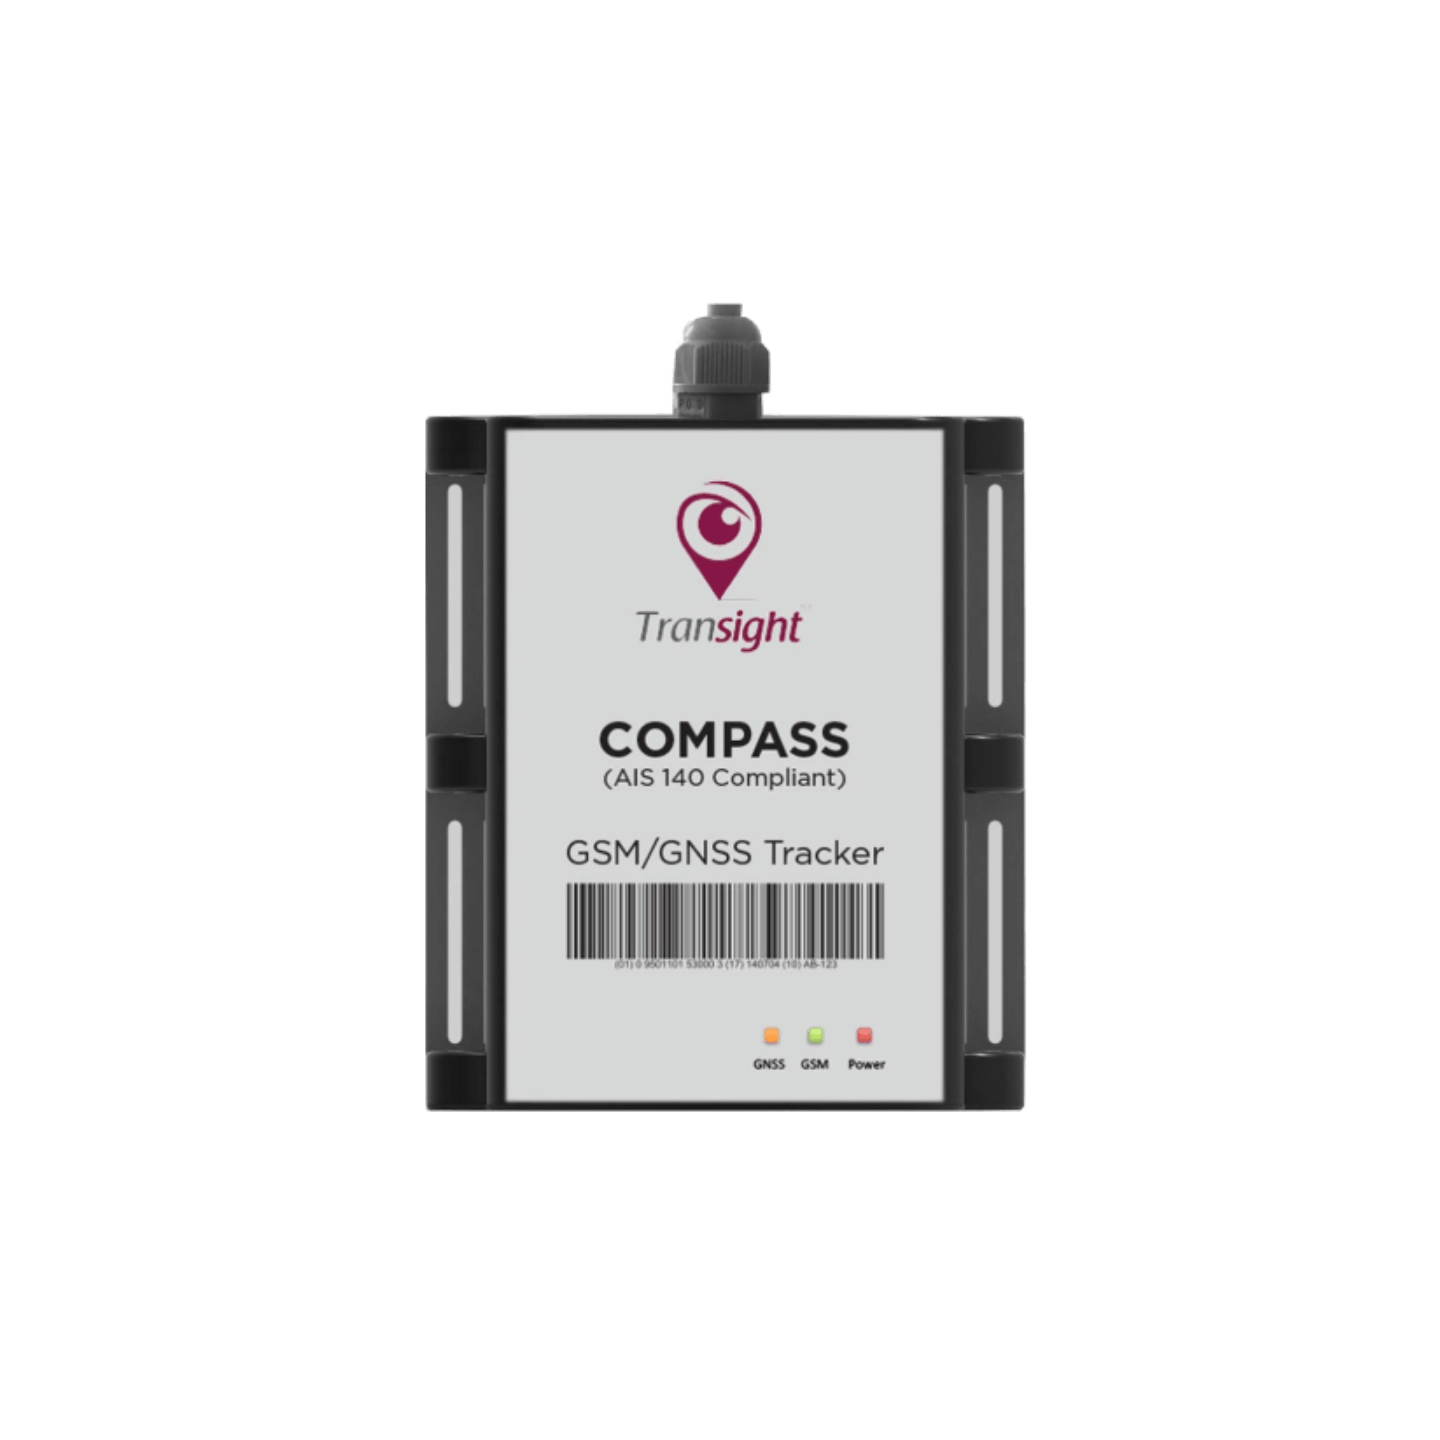 COMPASS GNSS and IRNSS Downlink with 1.5 meters Accuracy